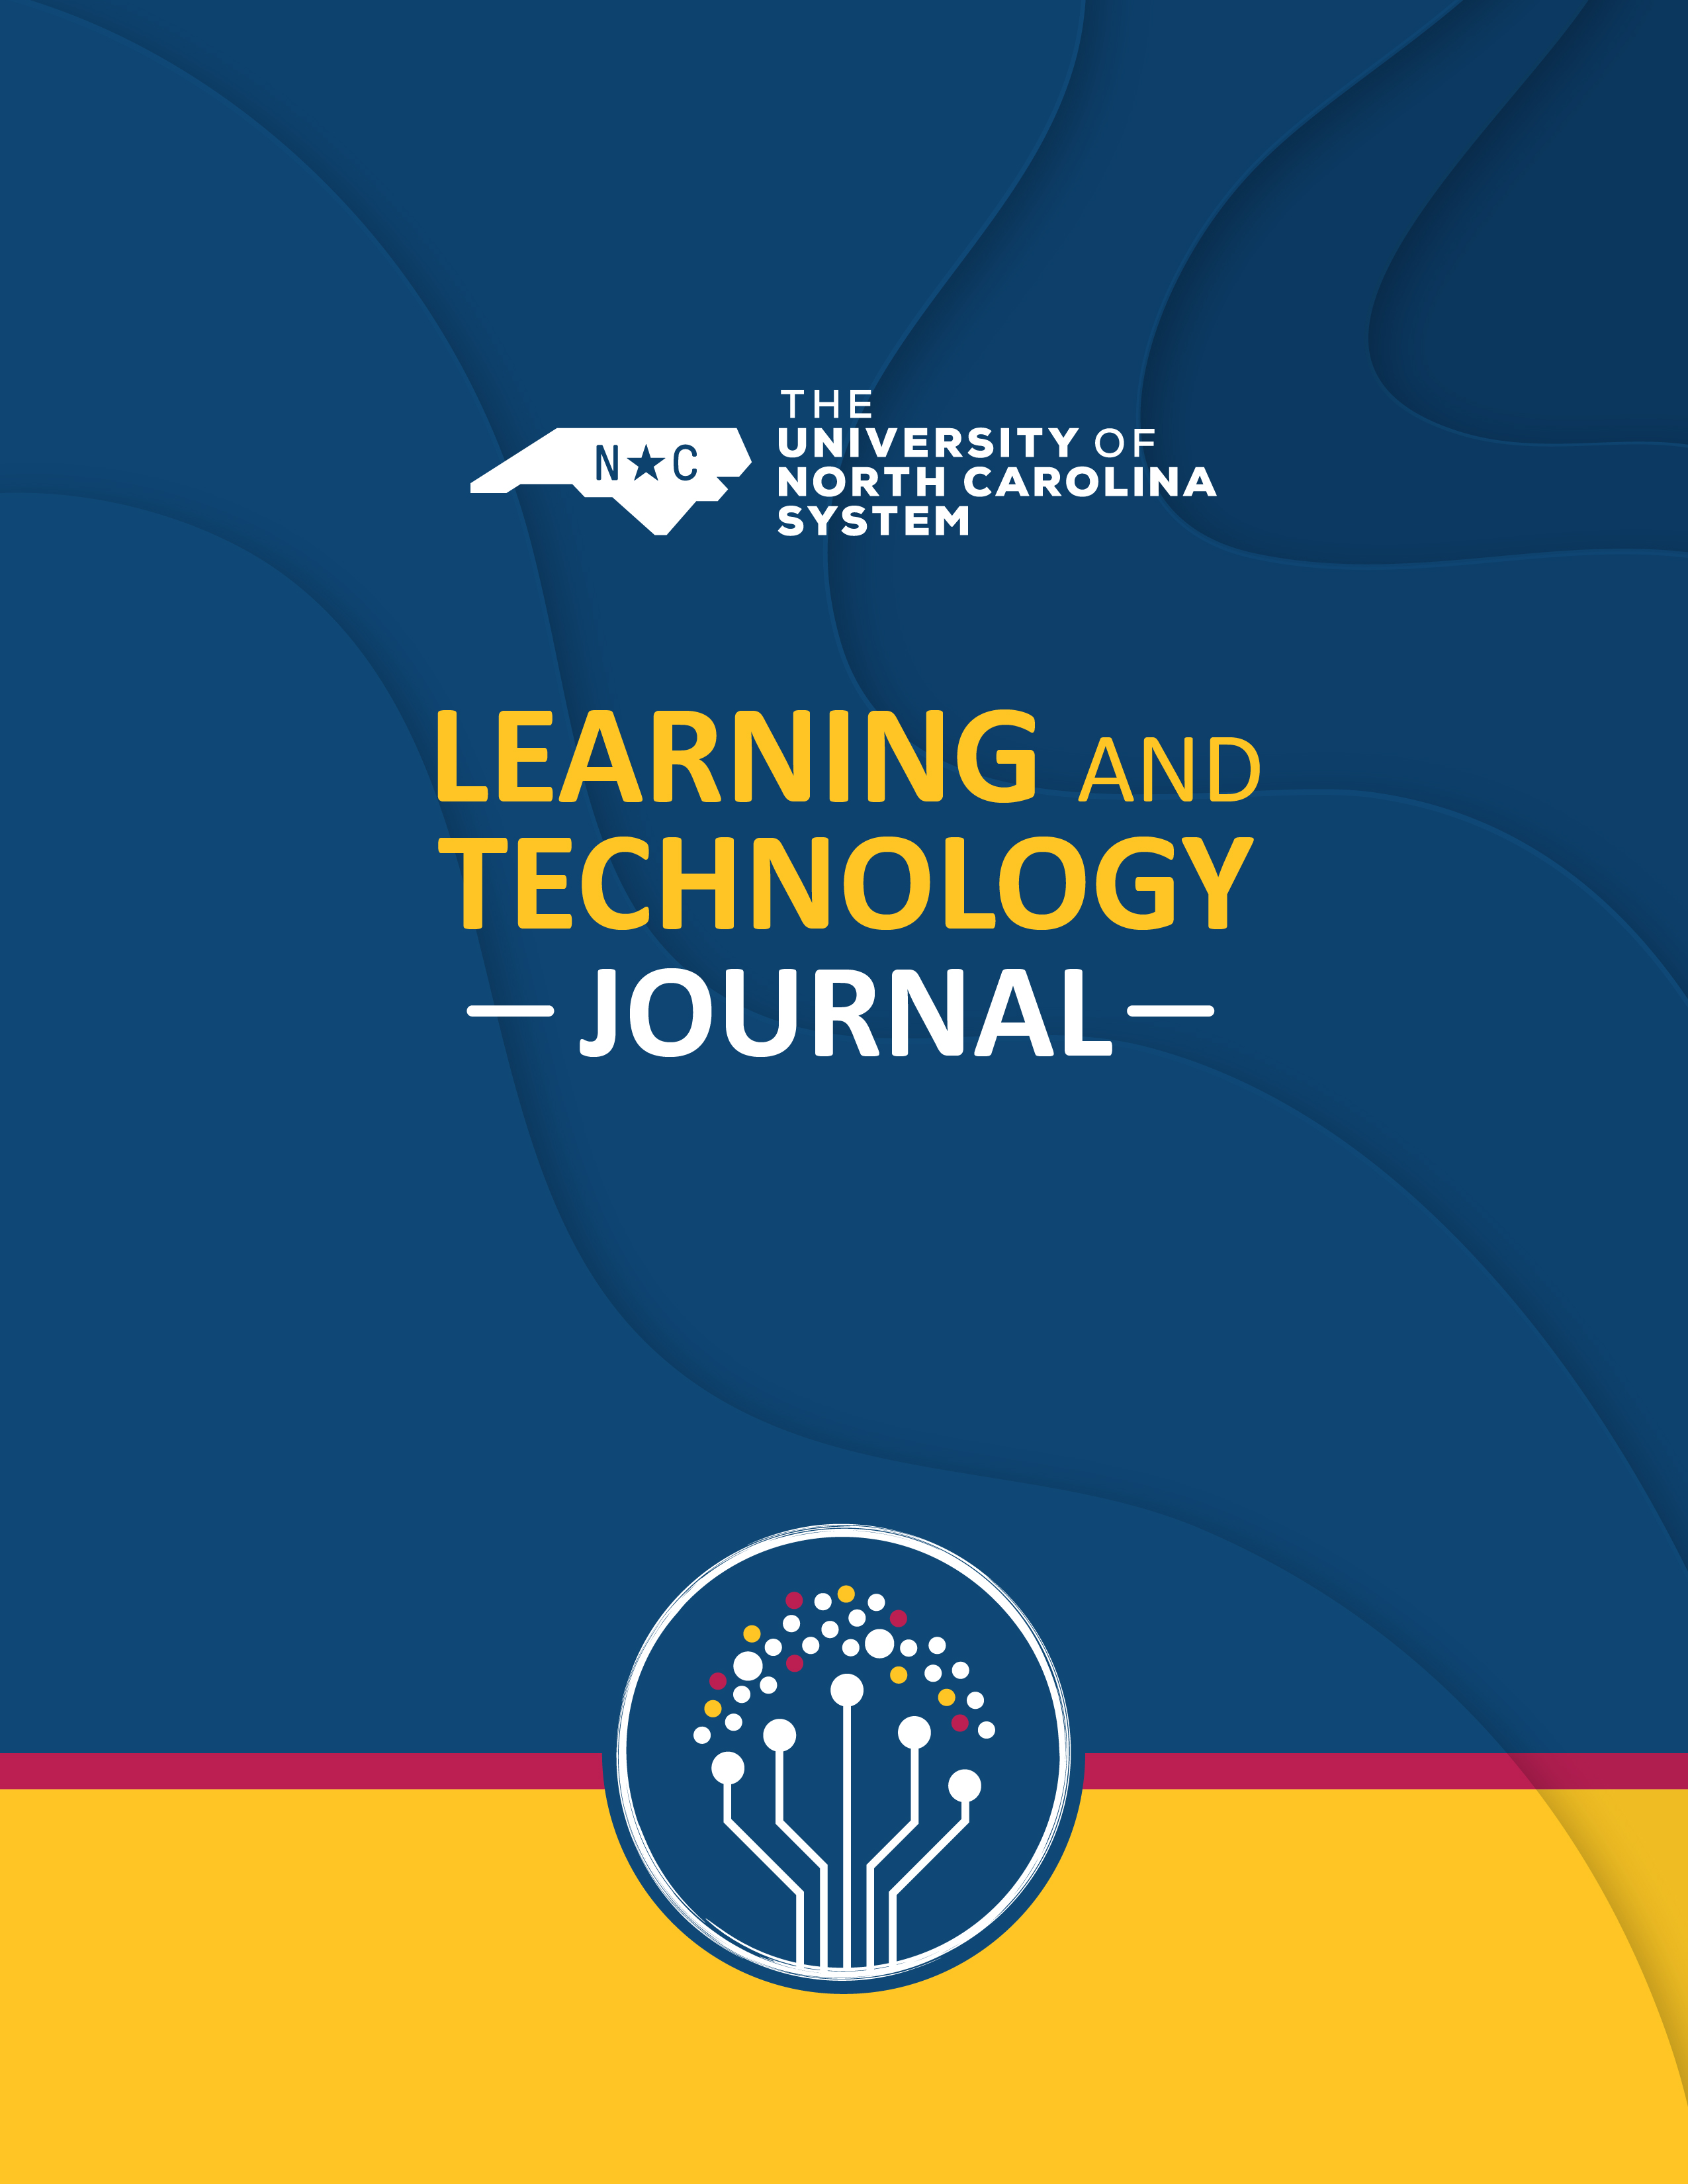 Journal cover with blue background. The UNC System logo is in white and centered at the top. The words "Learning and Technology" are in yellow and the word "Journal" is in white. The Learning and Technology logo of an abstract light bulb is at the bottom of the page.